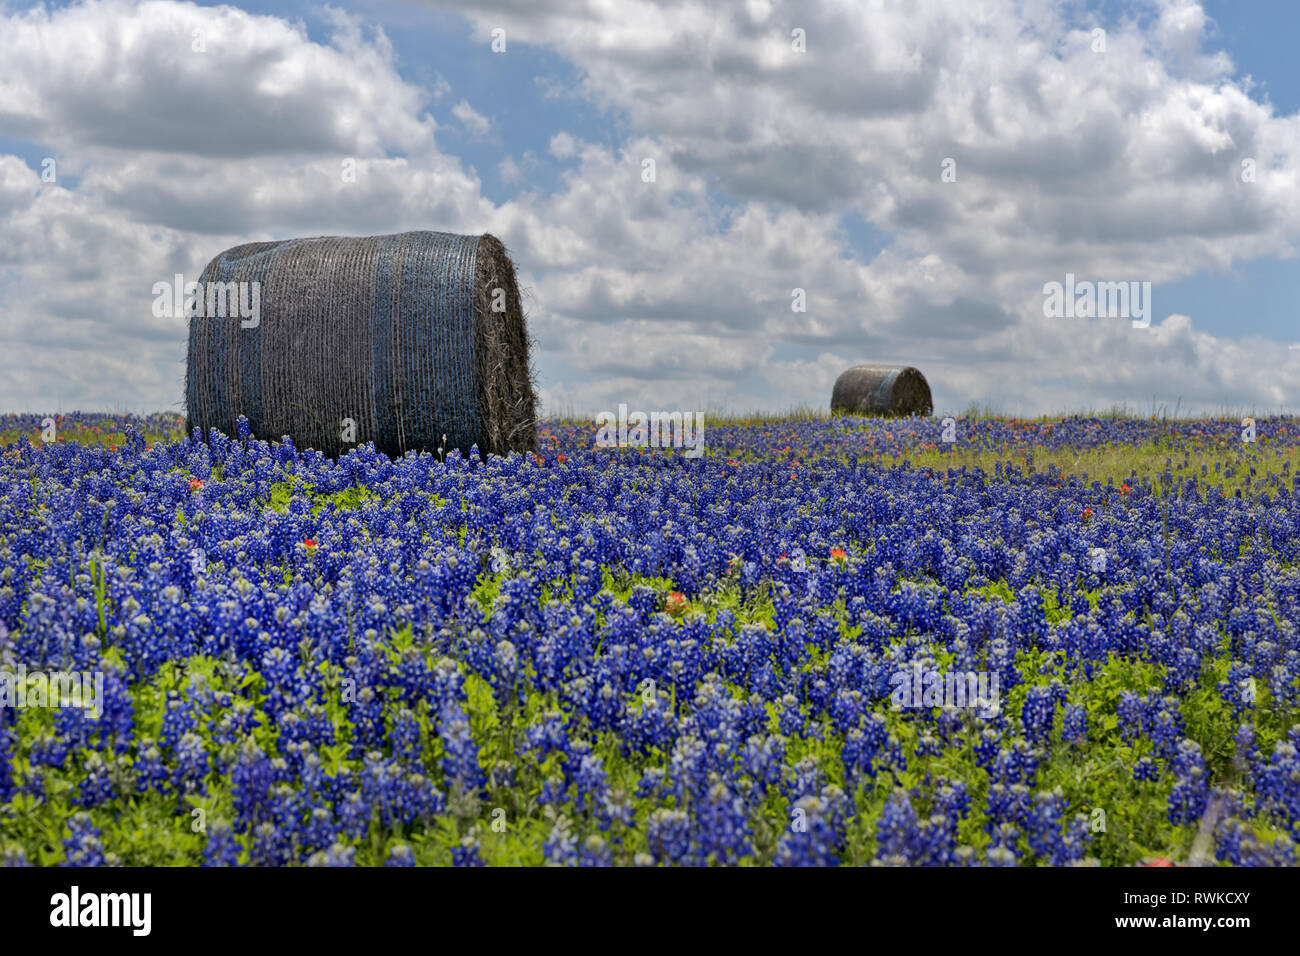 Bluebonnet field with hay bales, Texas, USA Stock Photo